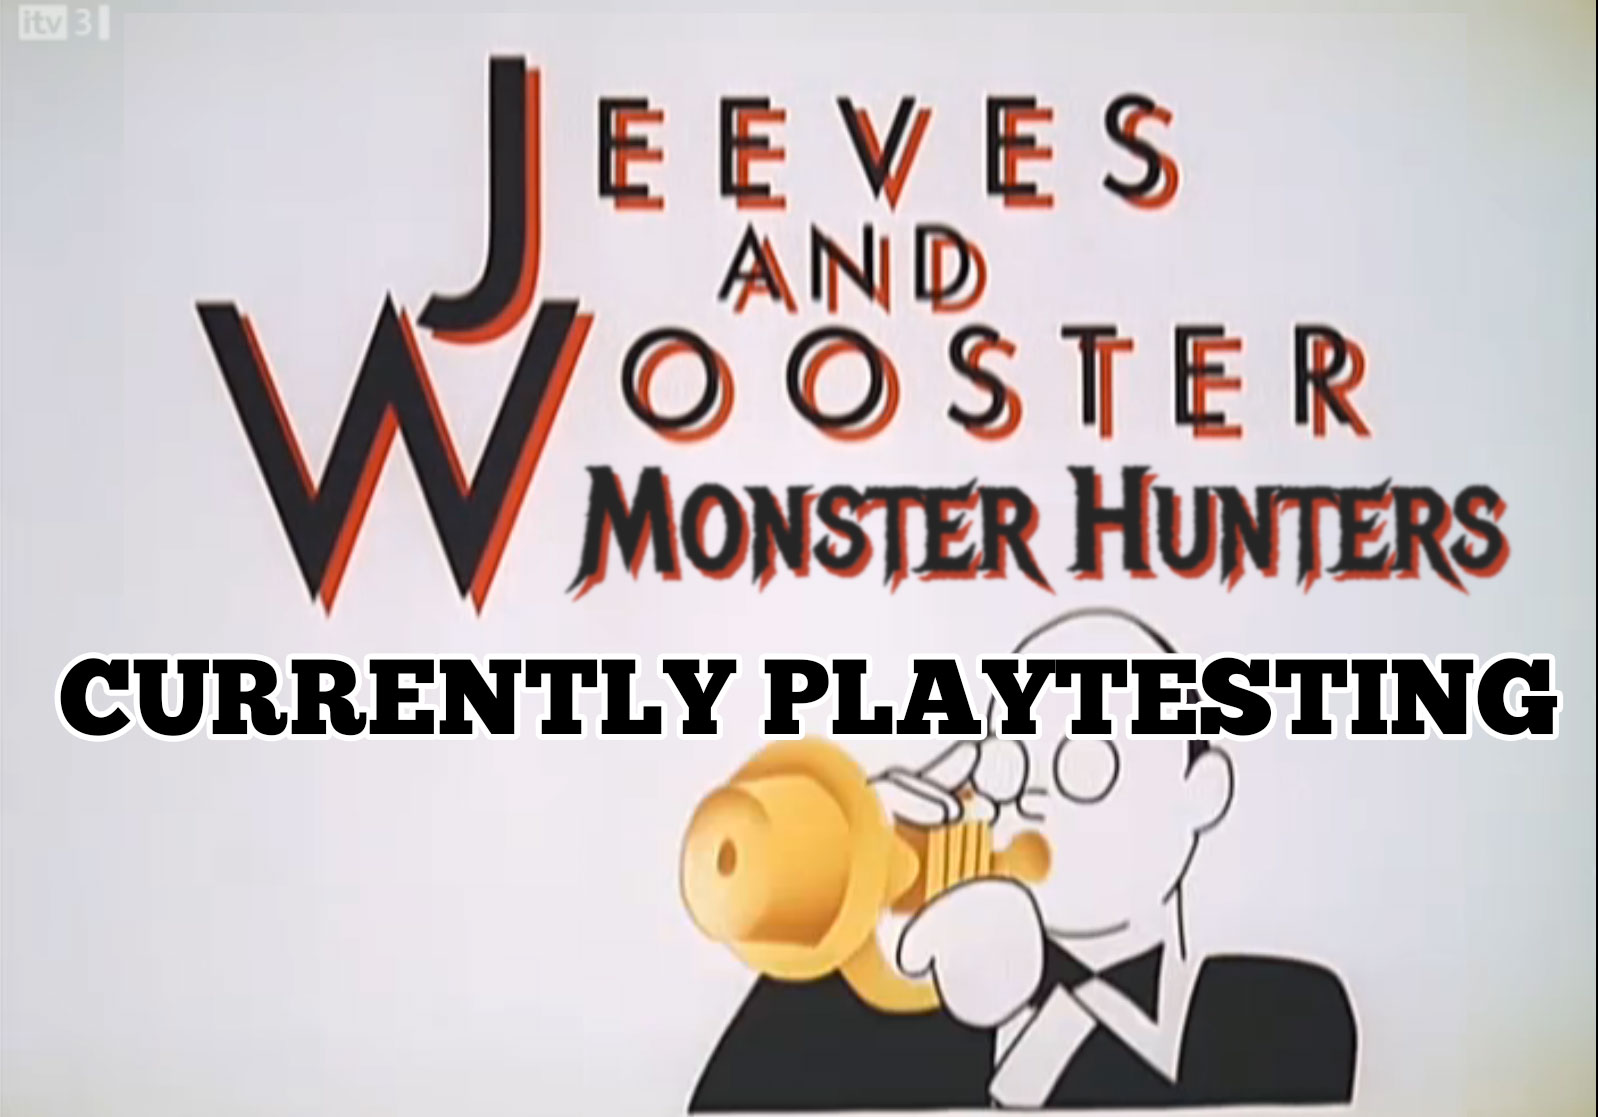 The Jeeves and Wooster title clip from the show with 'Monster Hunters' added